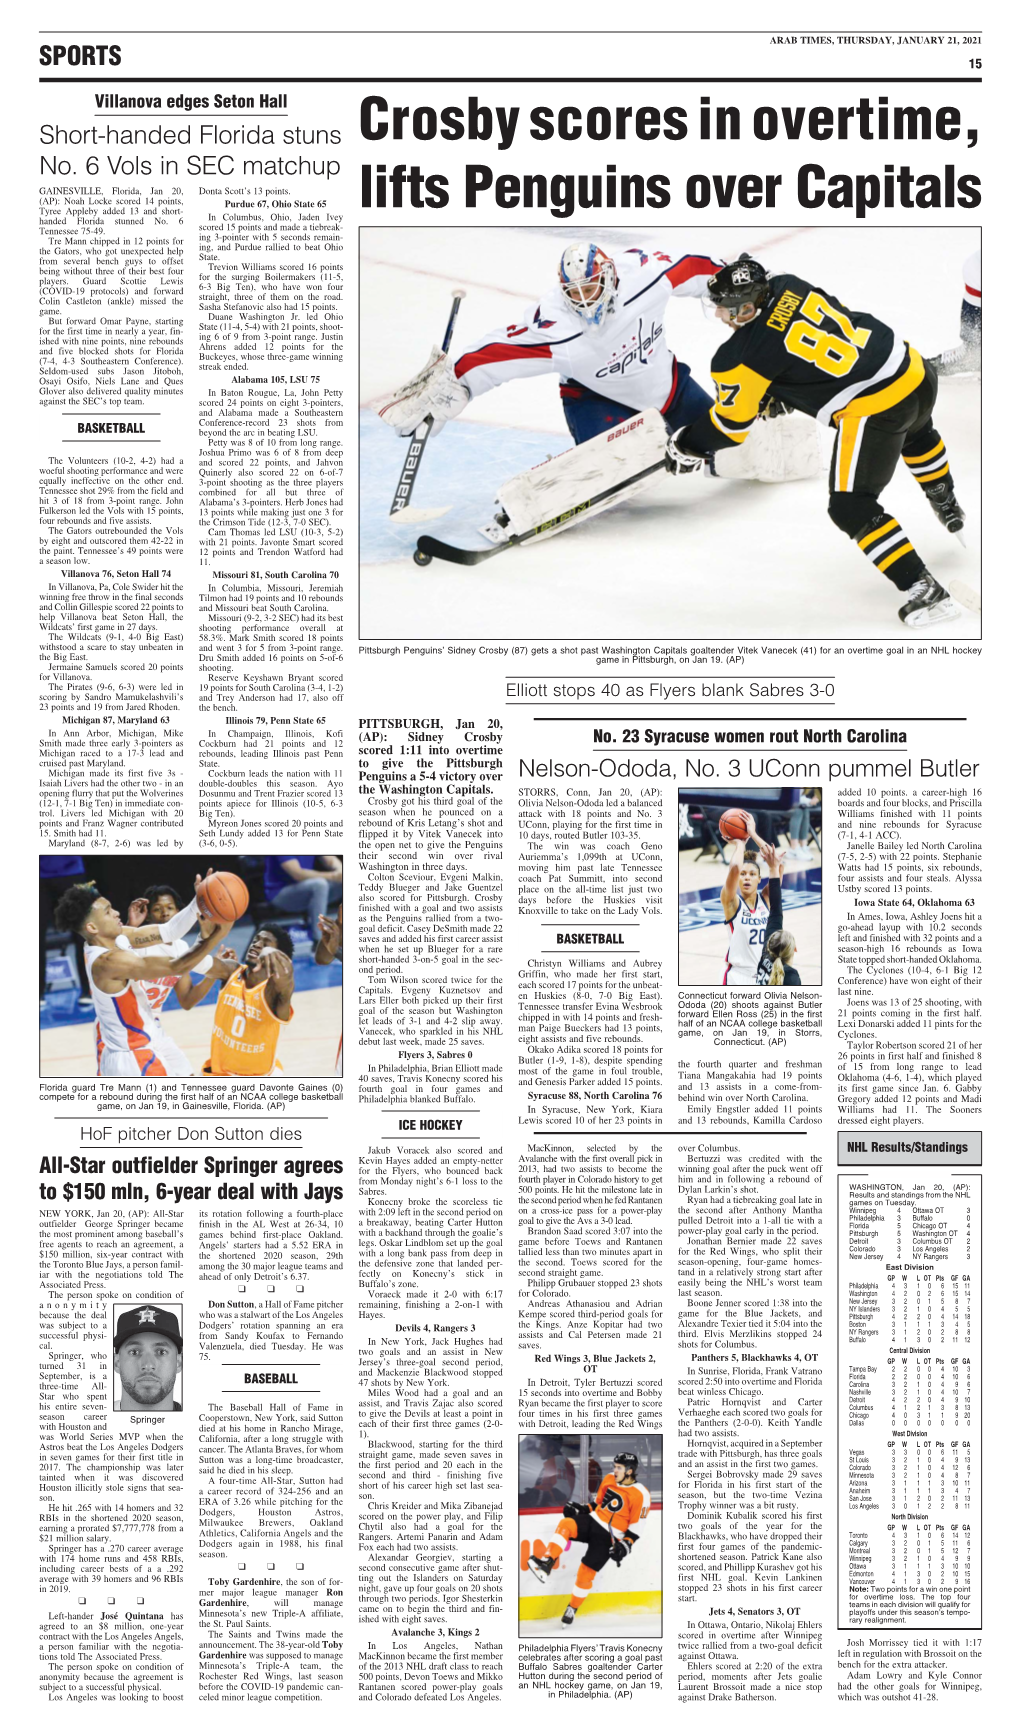 Crosby Scores in Overtime, Lifts Penguins Over Capitals